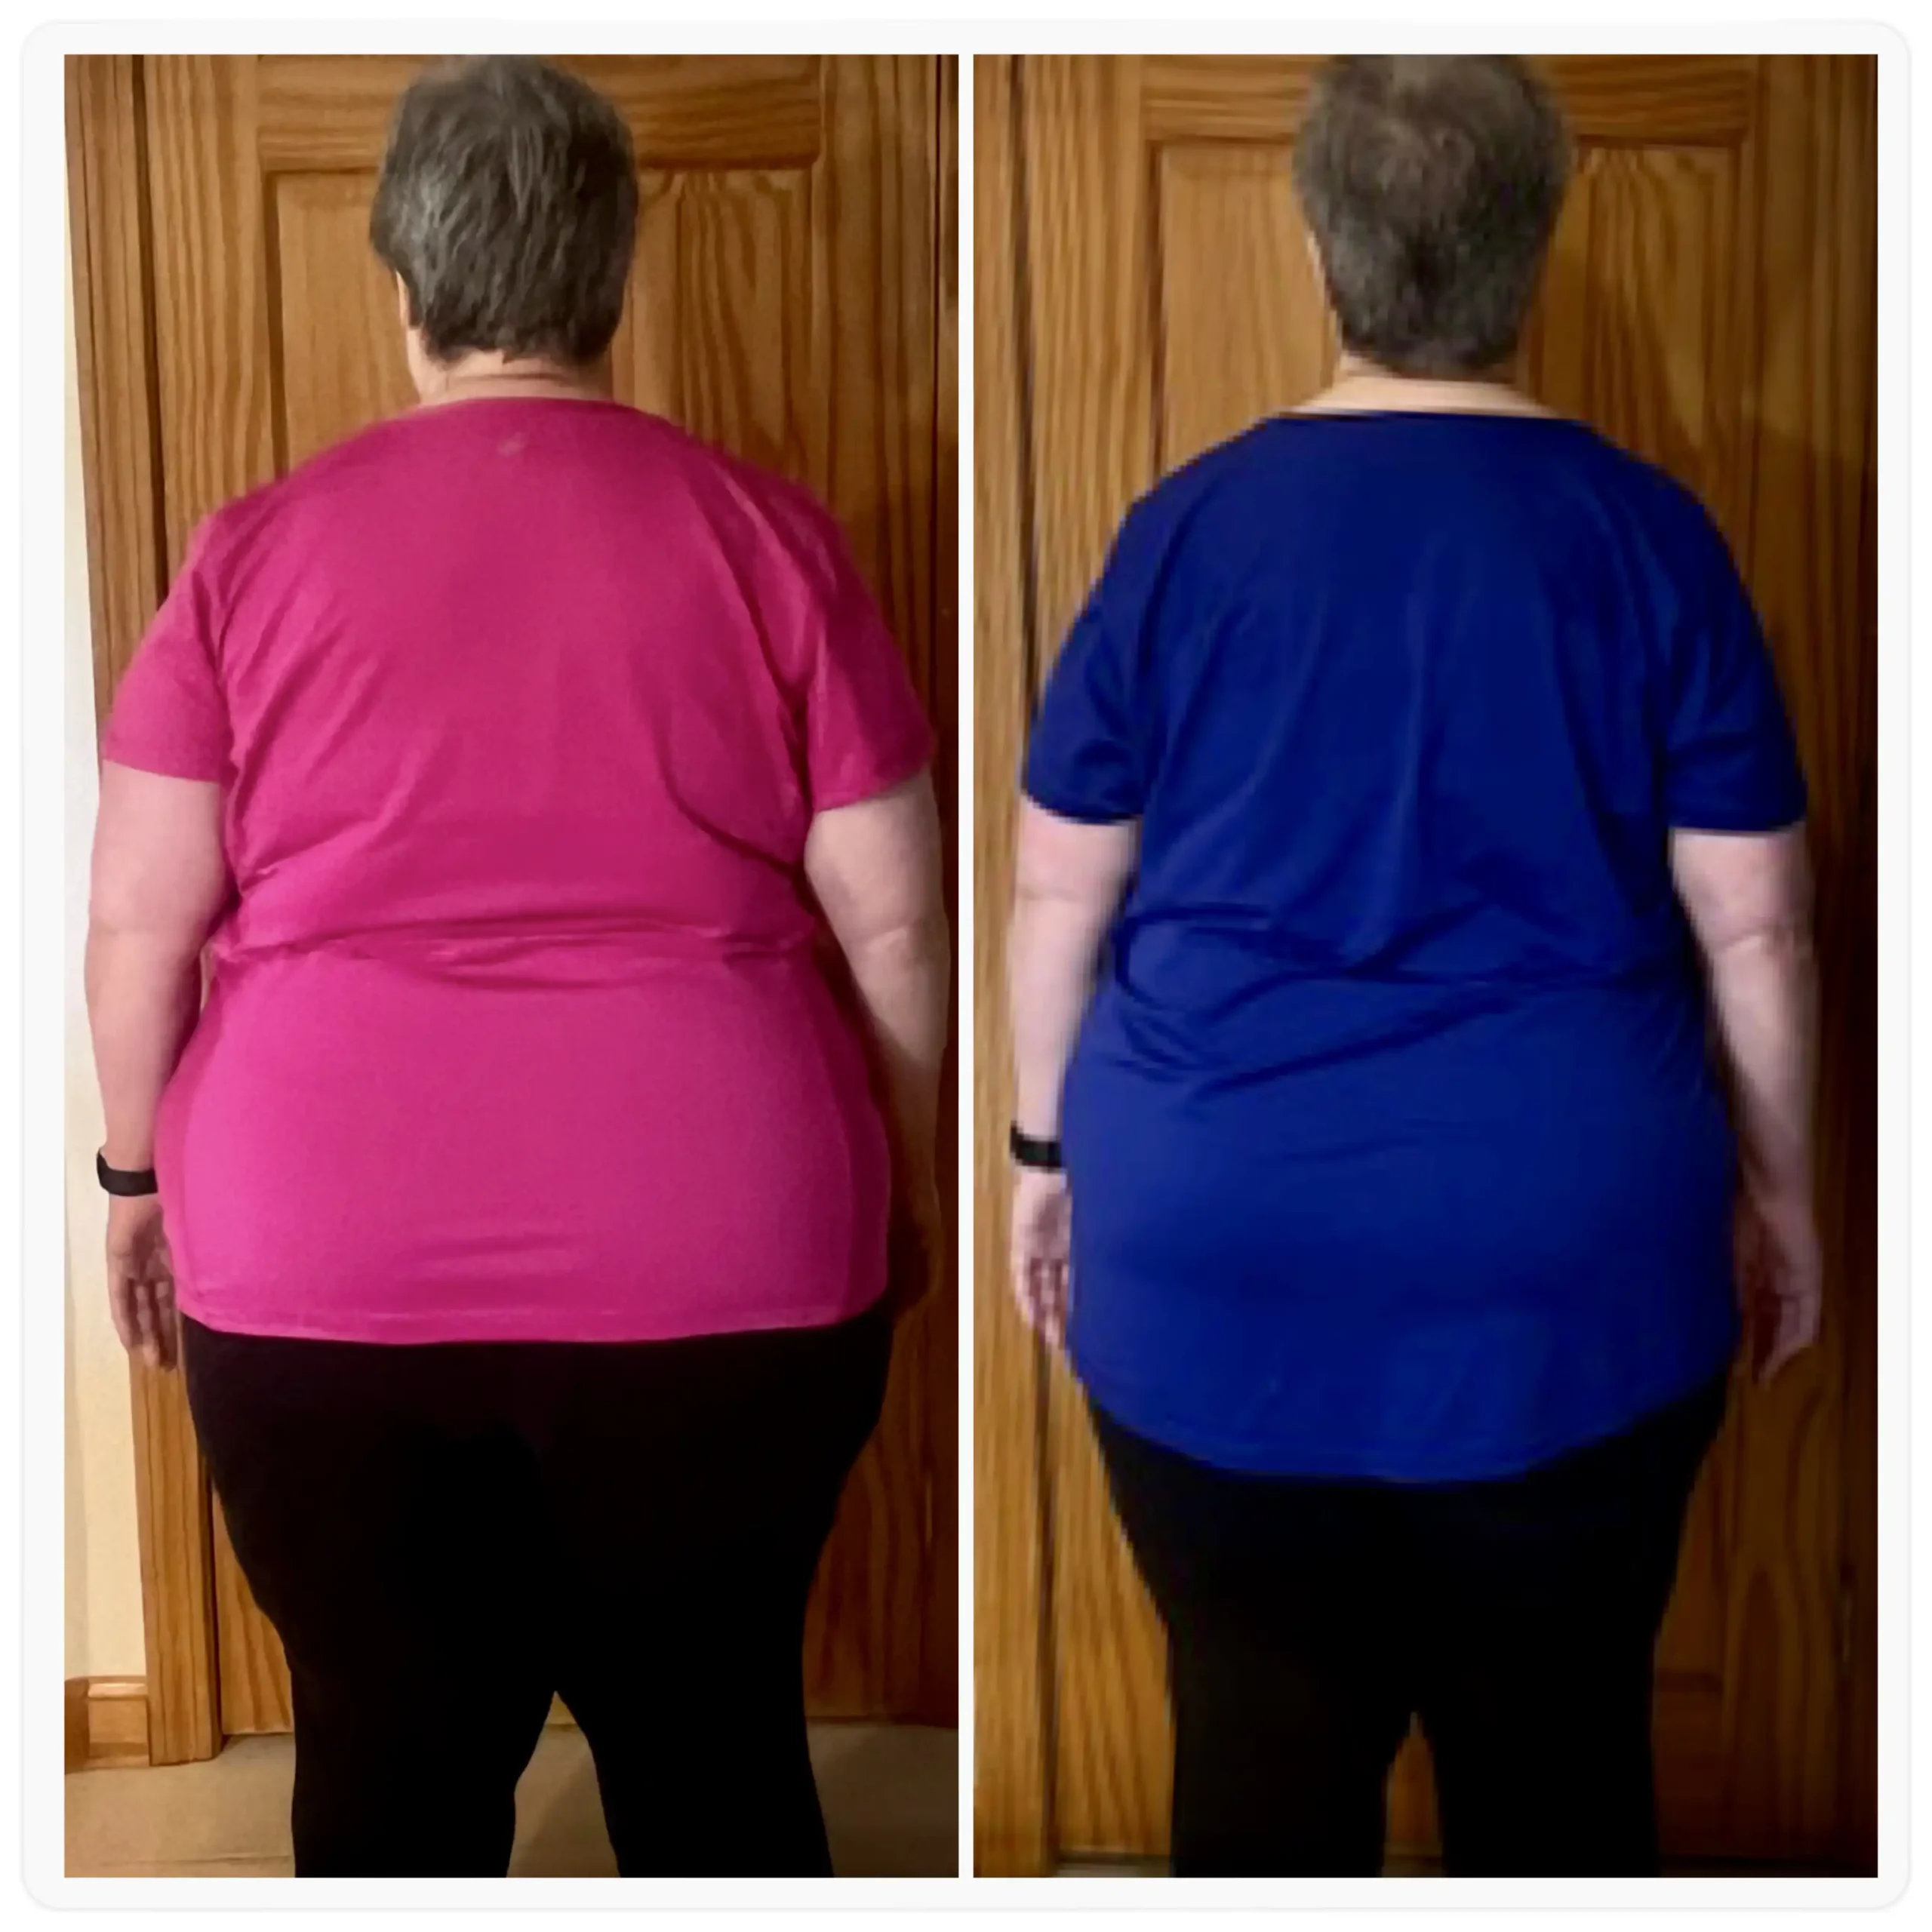 Linda before and after weight loss back view